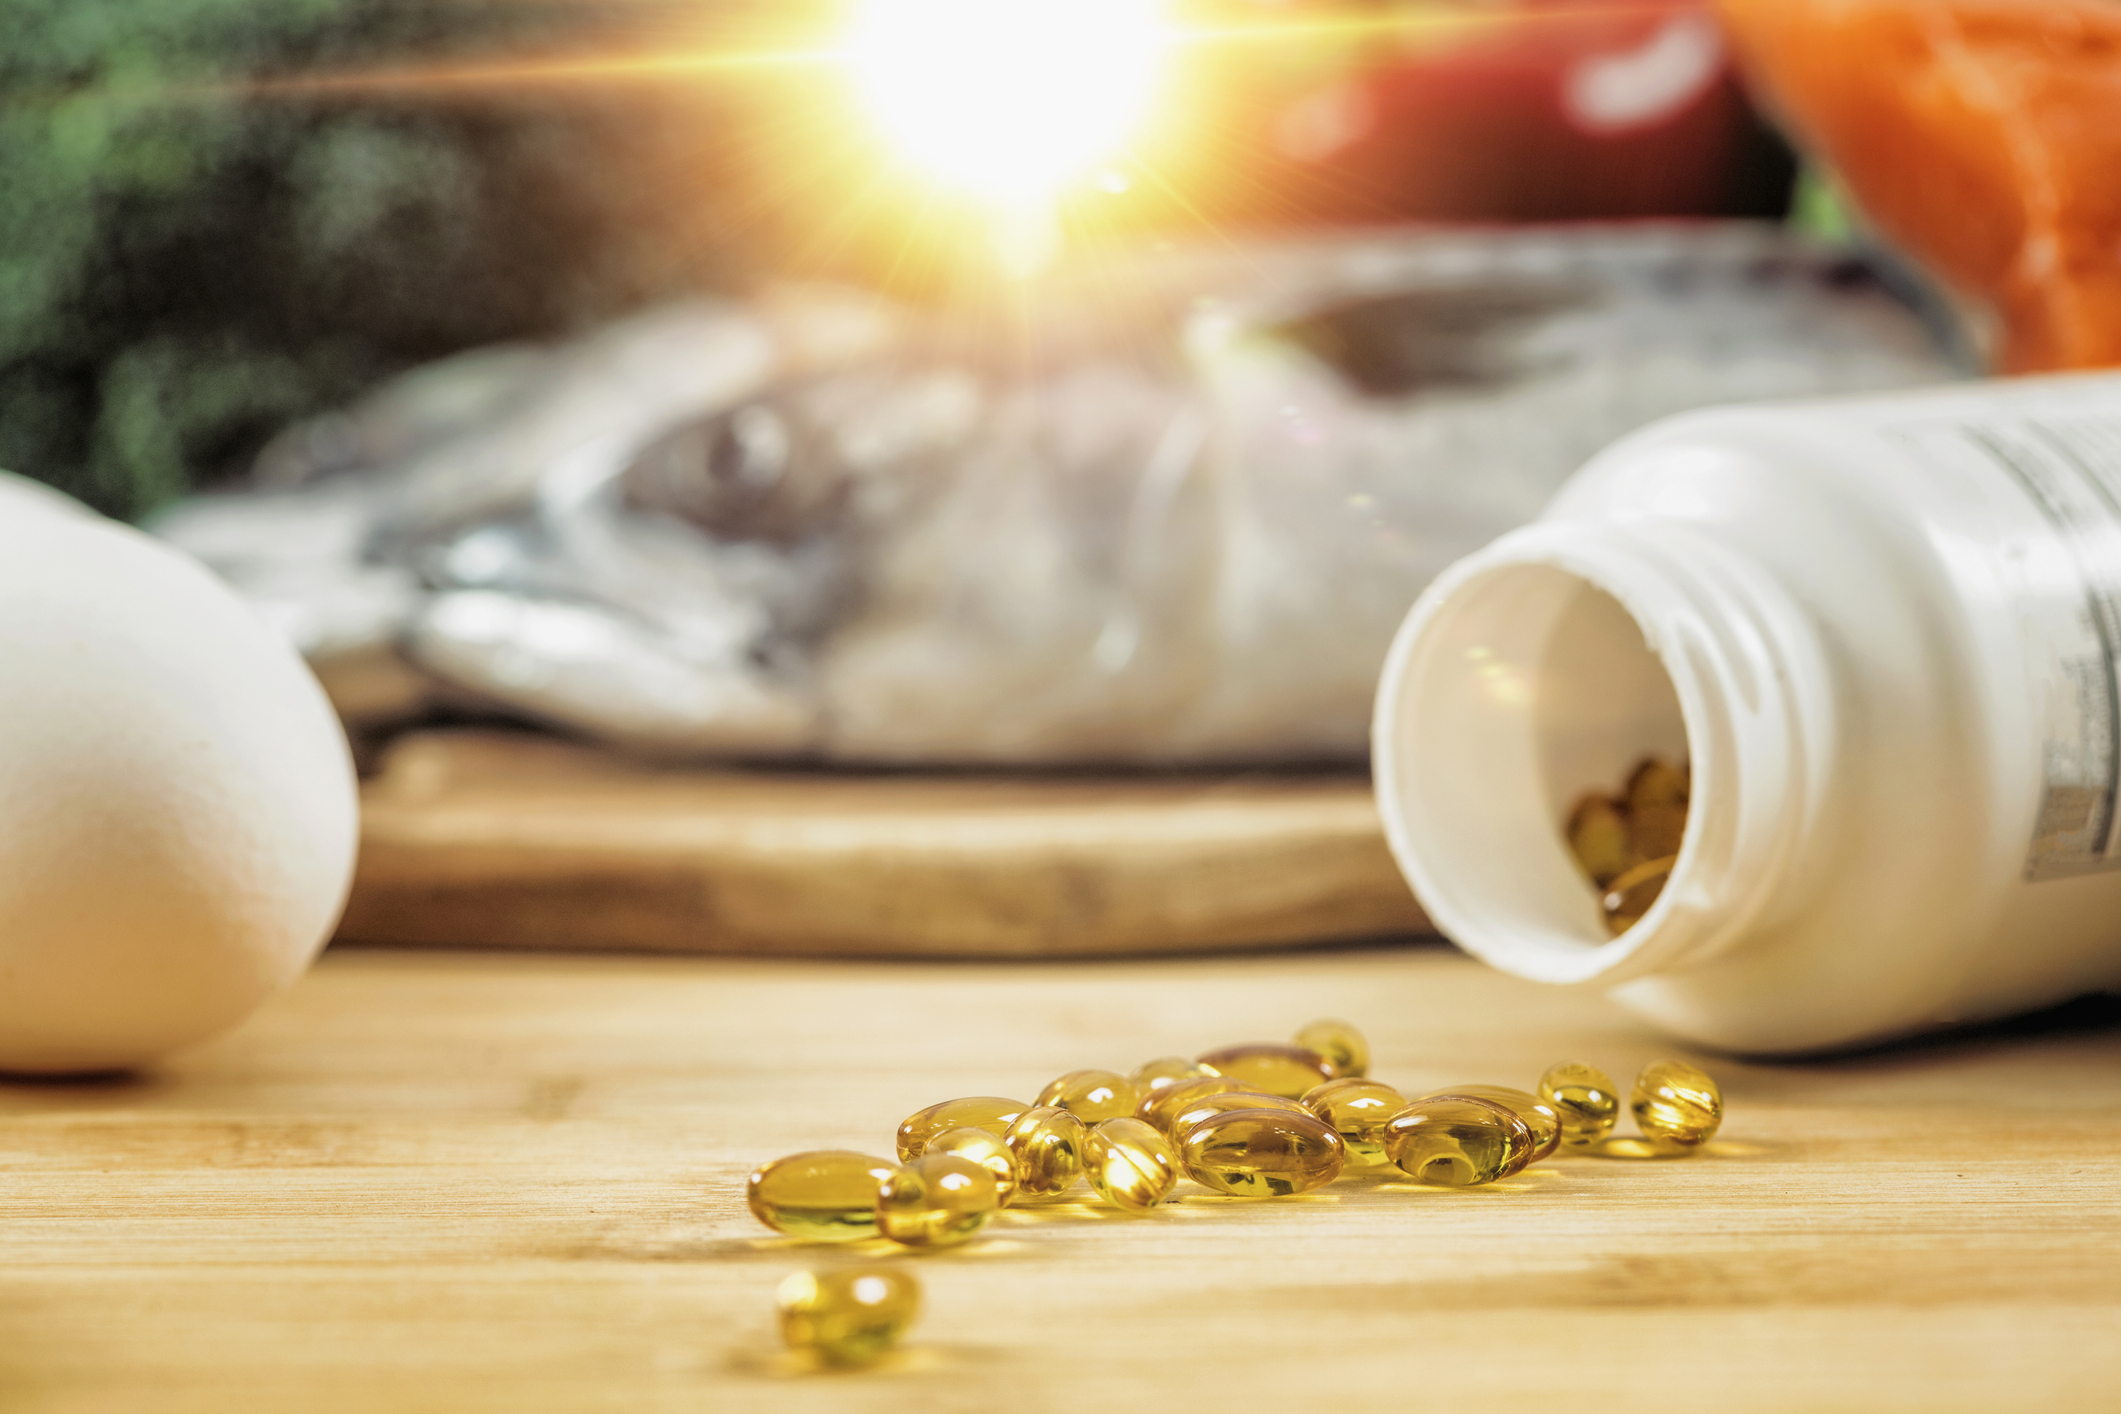 Discovery shows how omega-3s help prevent stroke